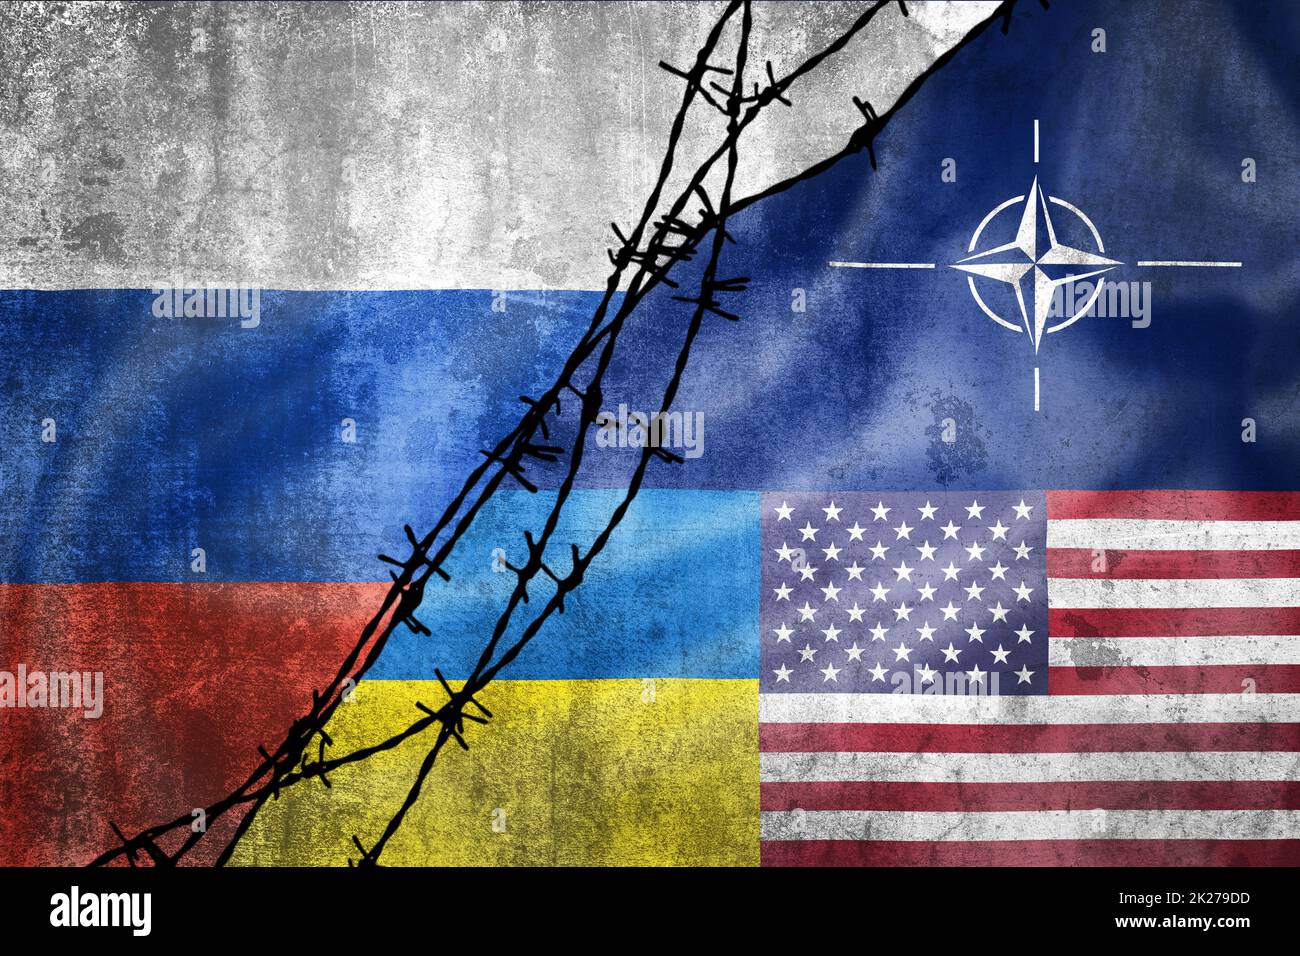 Grunge flags of Russian Federation, NATO, USA and Ukraine divided by barb wire illustration Stock Photo